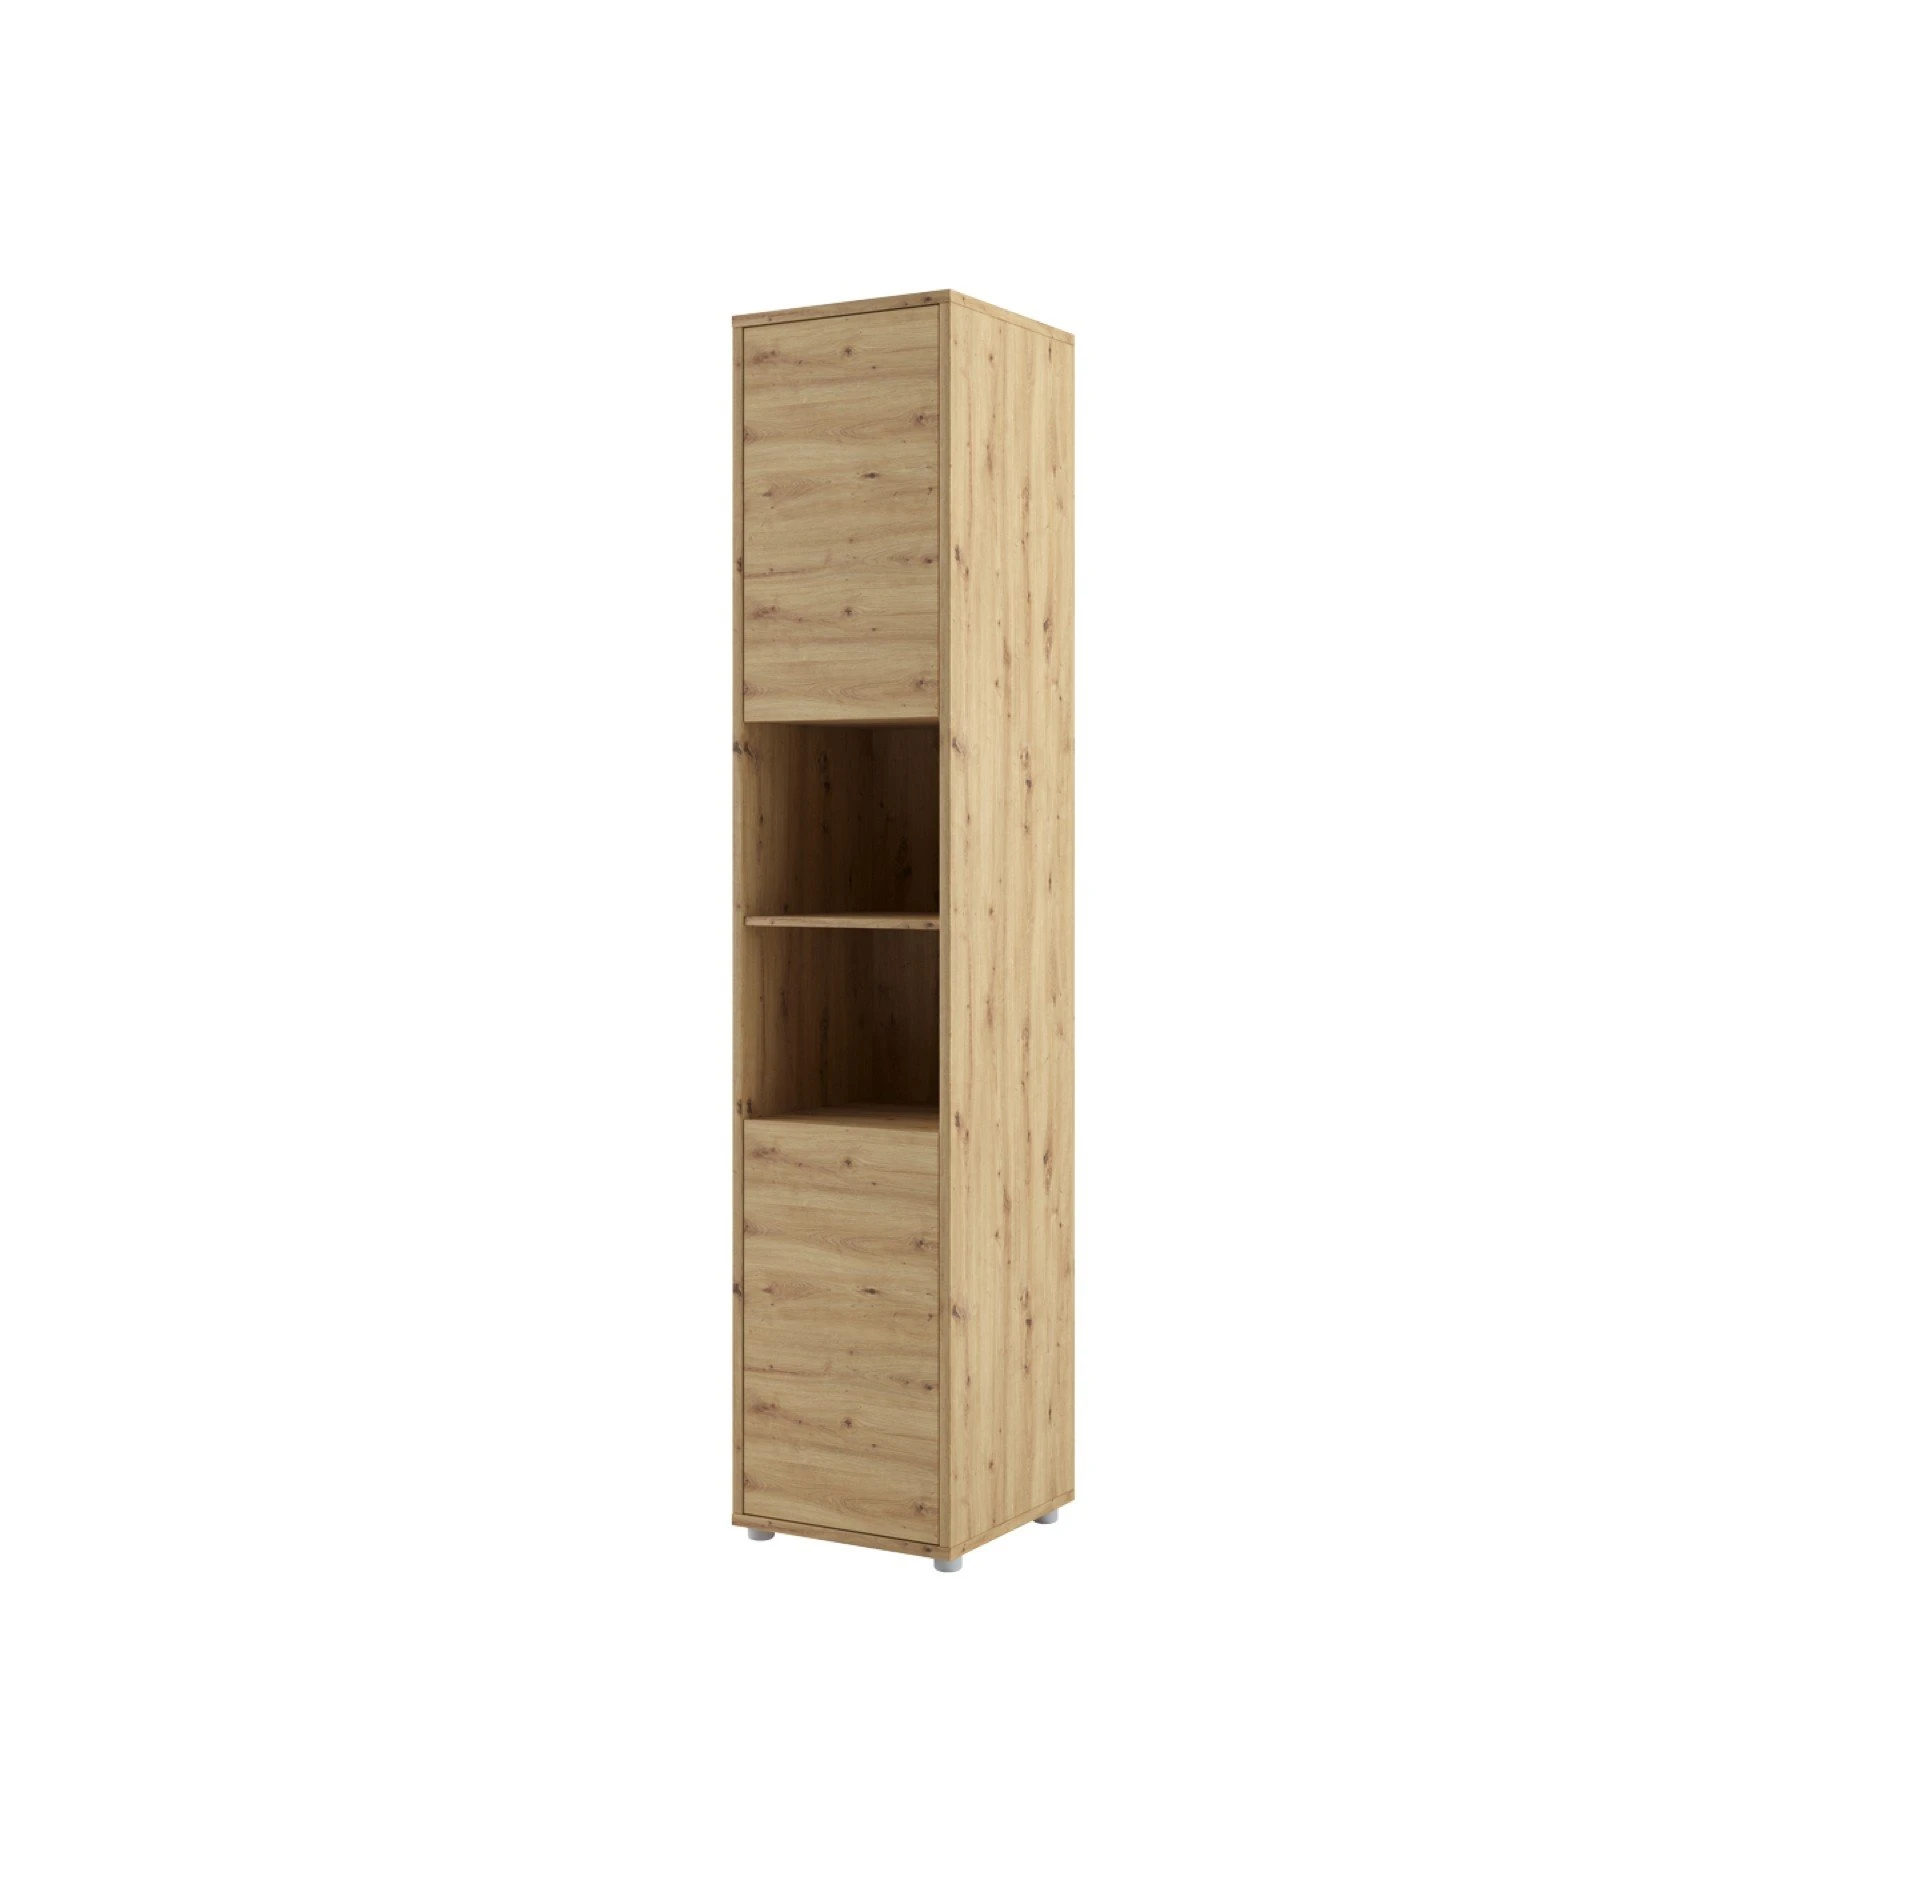 BC-08 Tall Storage Cabinet for Vertical Wall Bed Concept Oak Artisan Tall Storage Cabinet 